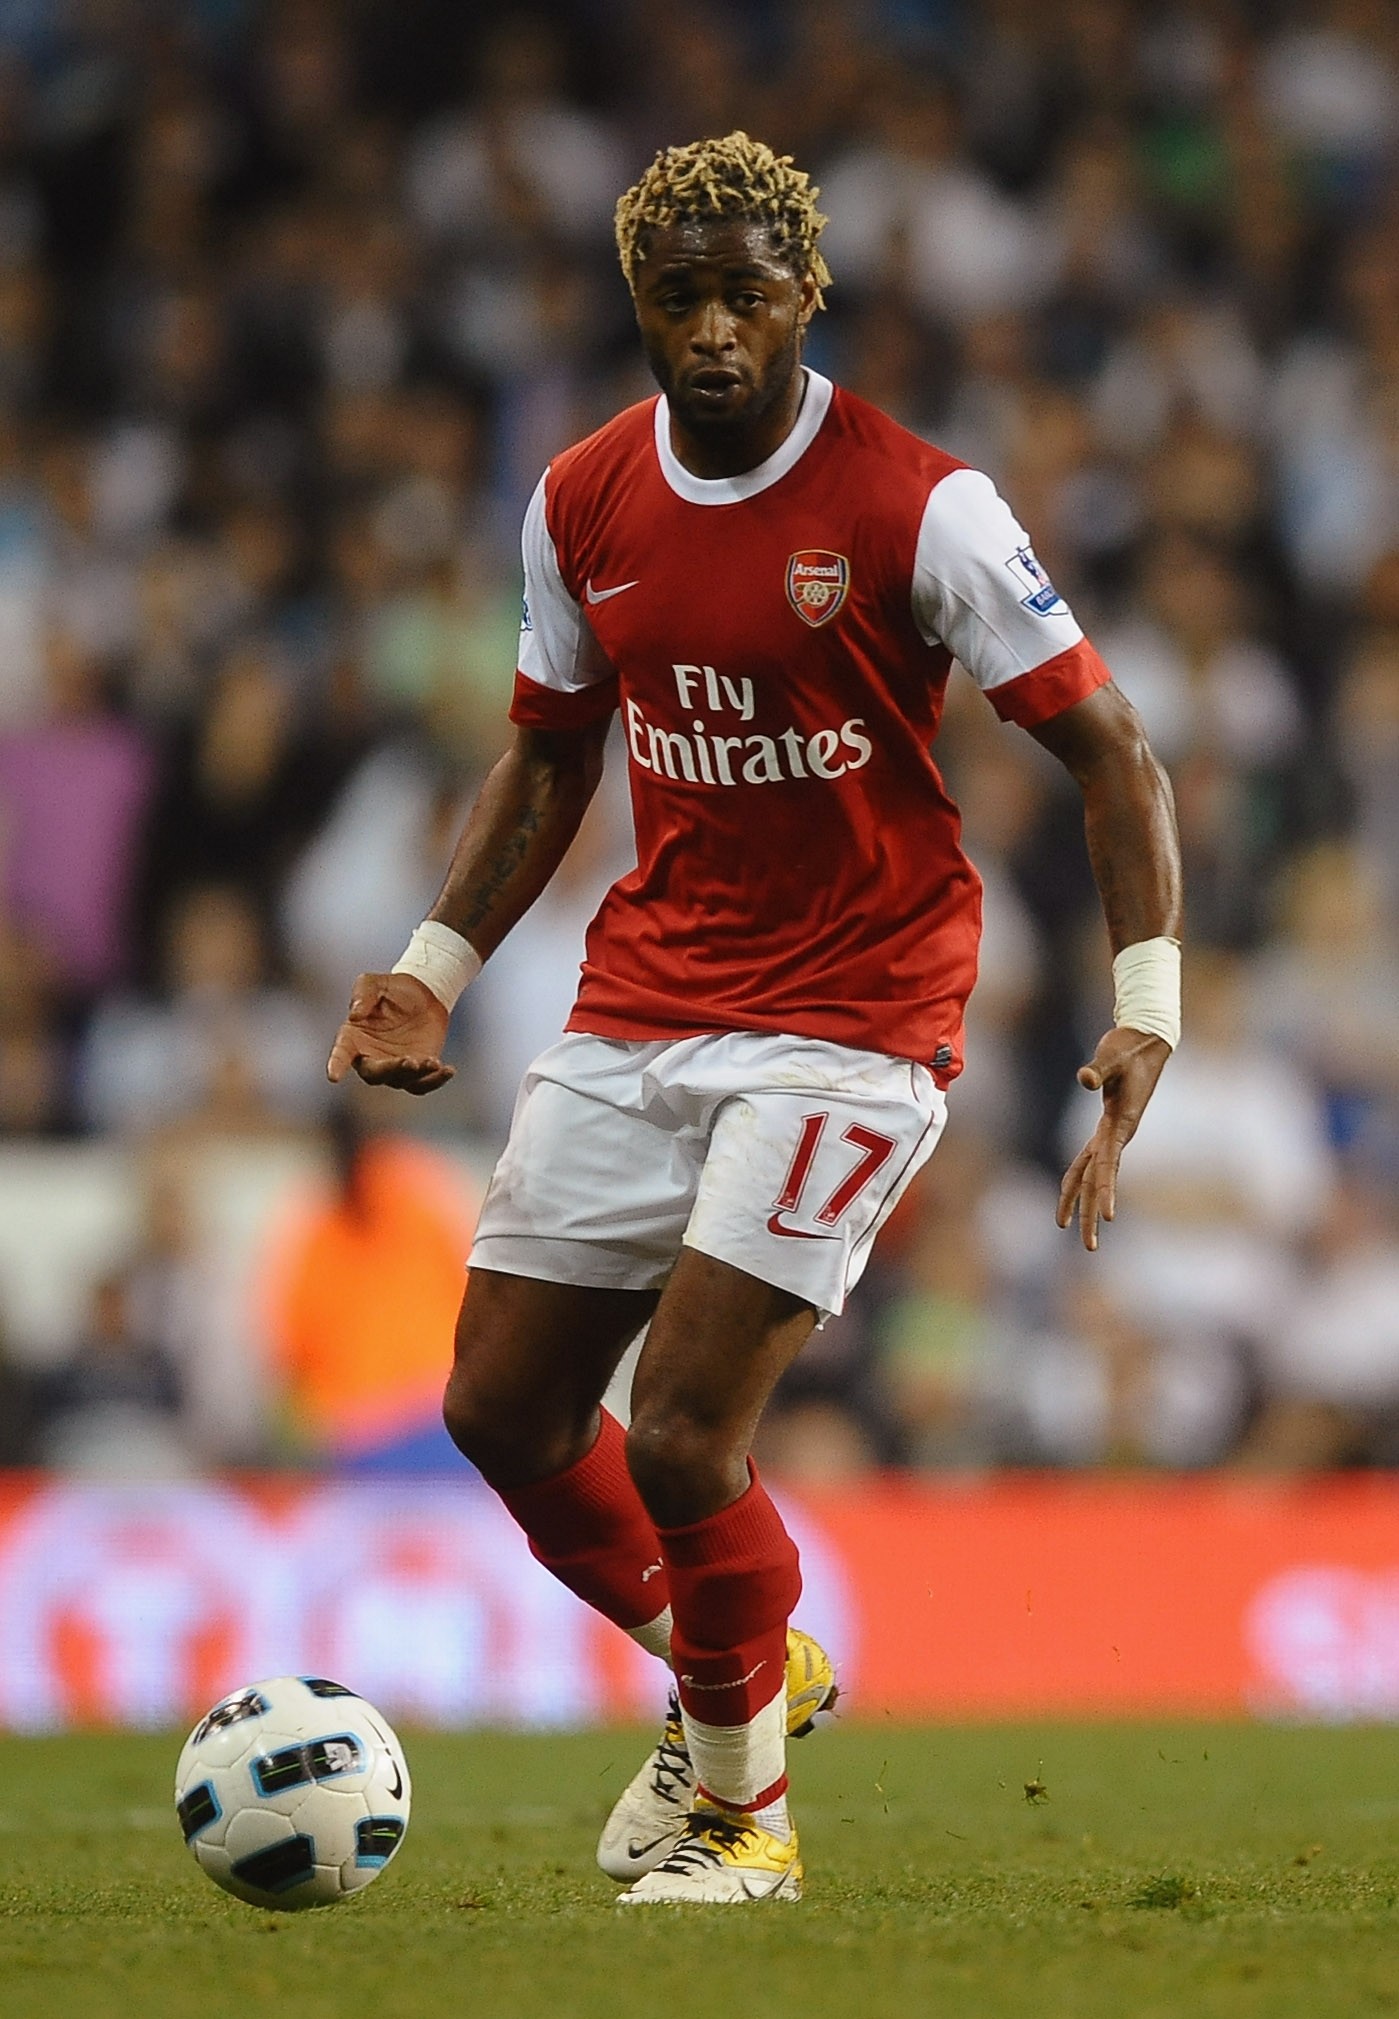 LONDON, ENGLAND - APRIL 20:  Alex Song of Arsenal on the ball during the Barclays Premier League match between Tottenham Hotspur and Arsenal at White Hart Lane on April 20, 2011 in London, England.  (Photo by Laurence Griffiths/Getty Images)